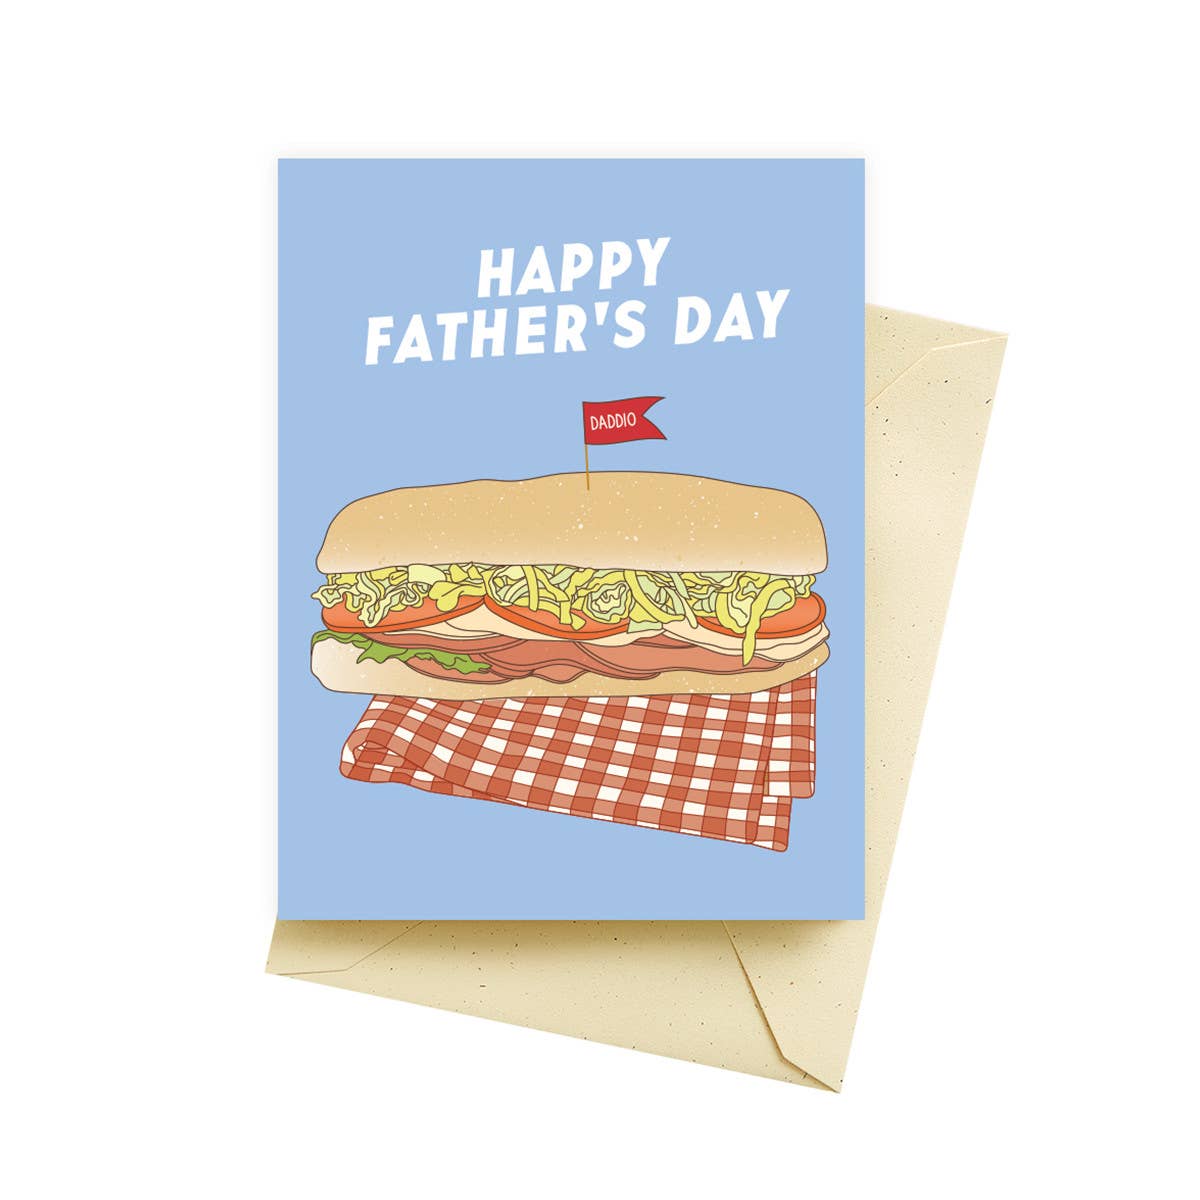 Father's day card with a hero sub on it. Text reads "Happy Father's Day" 